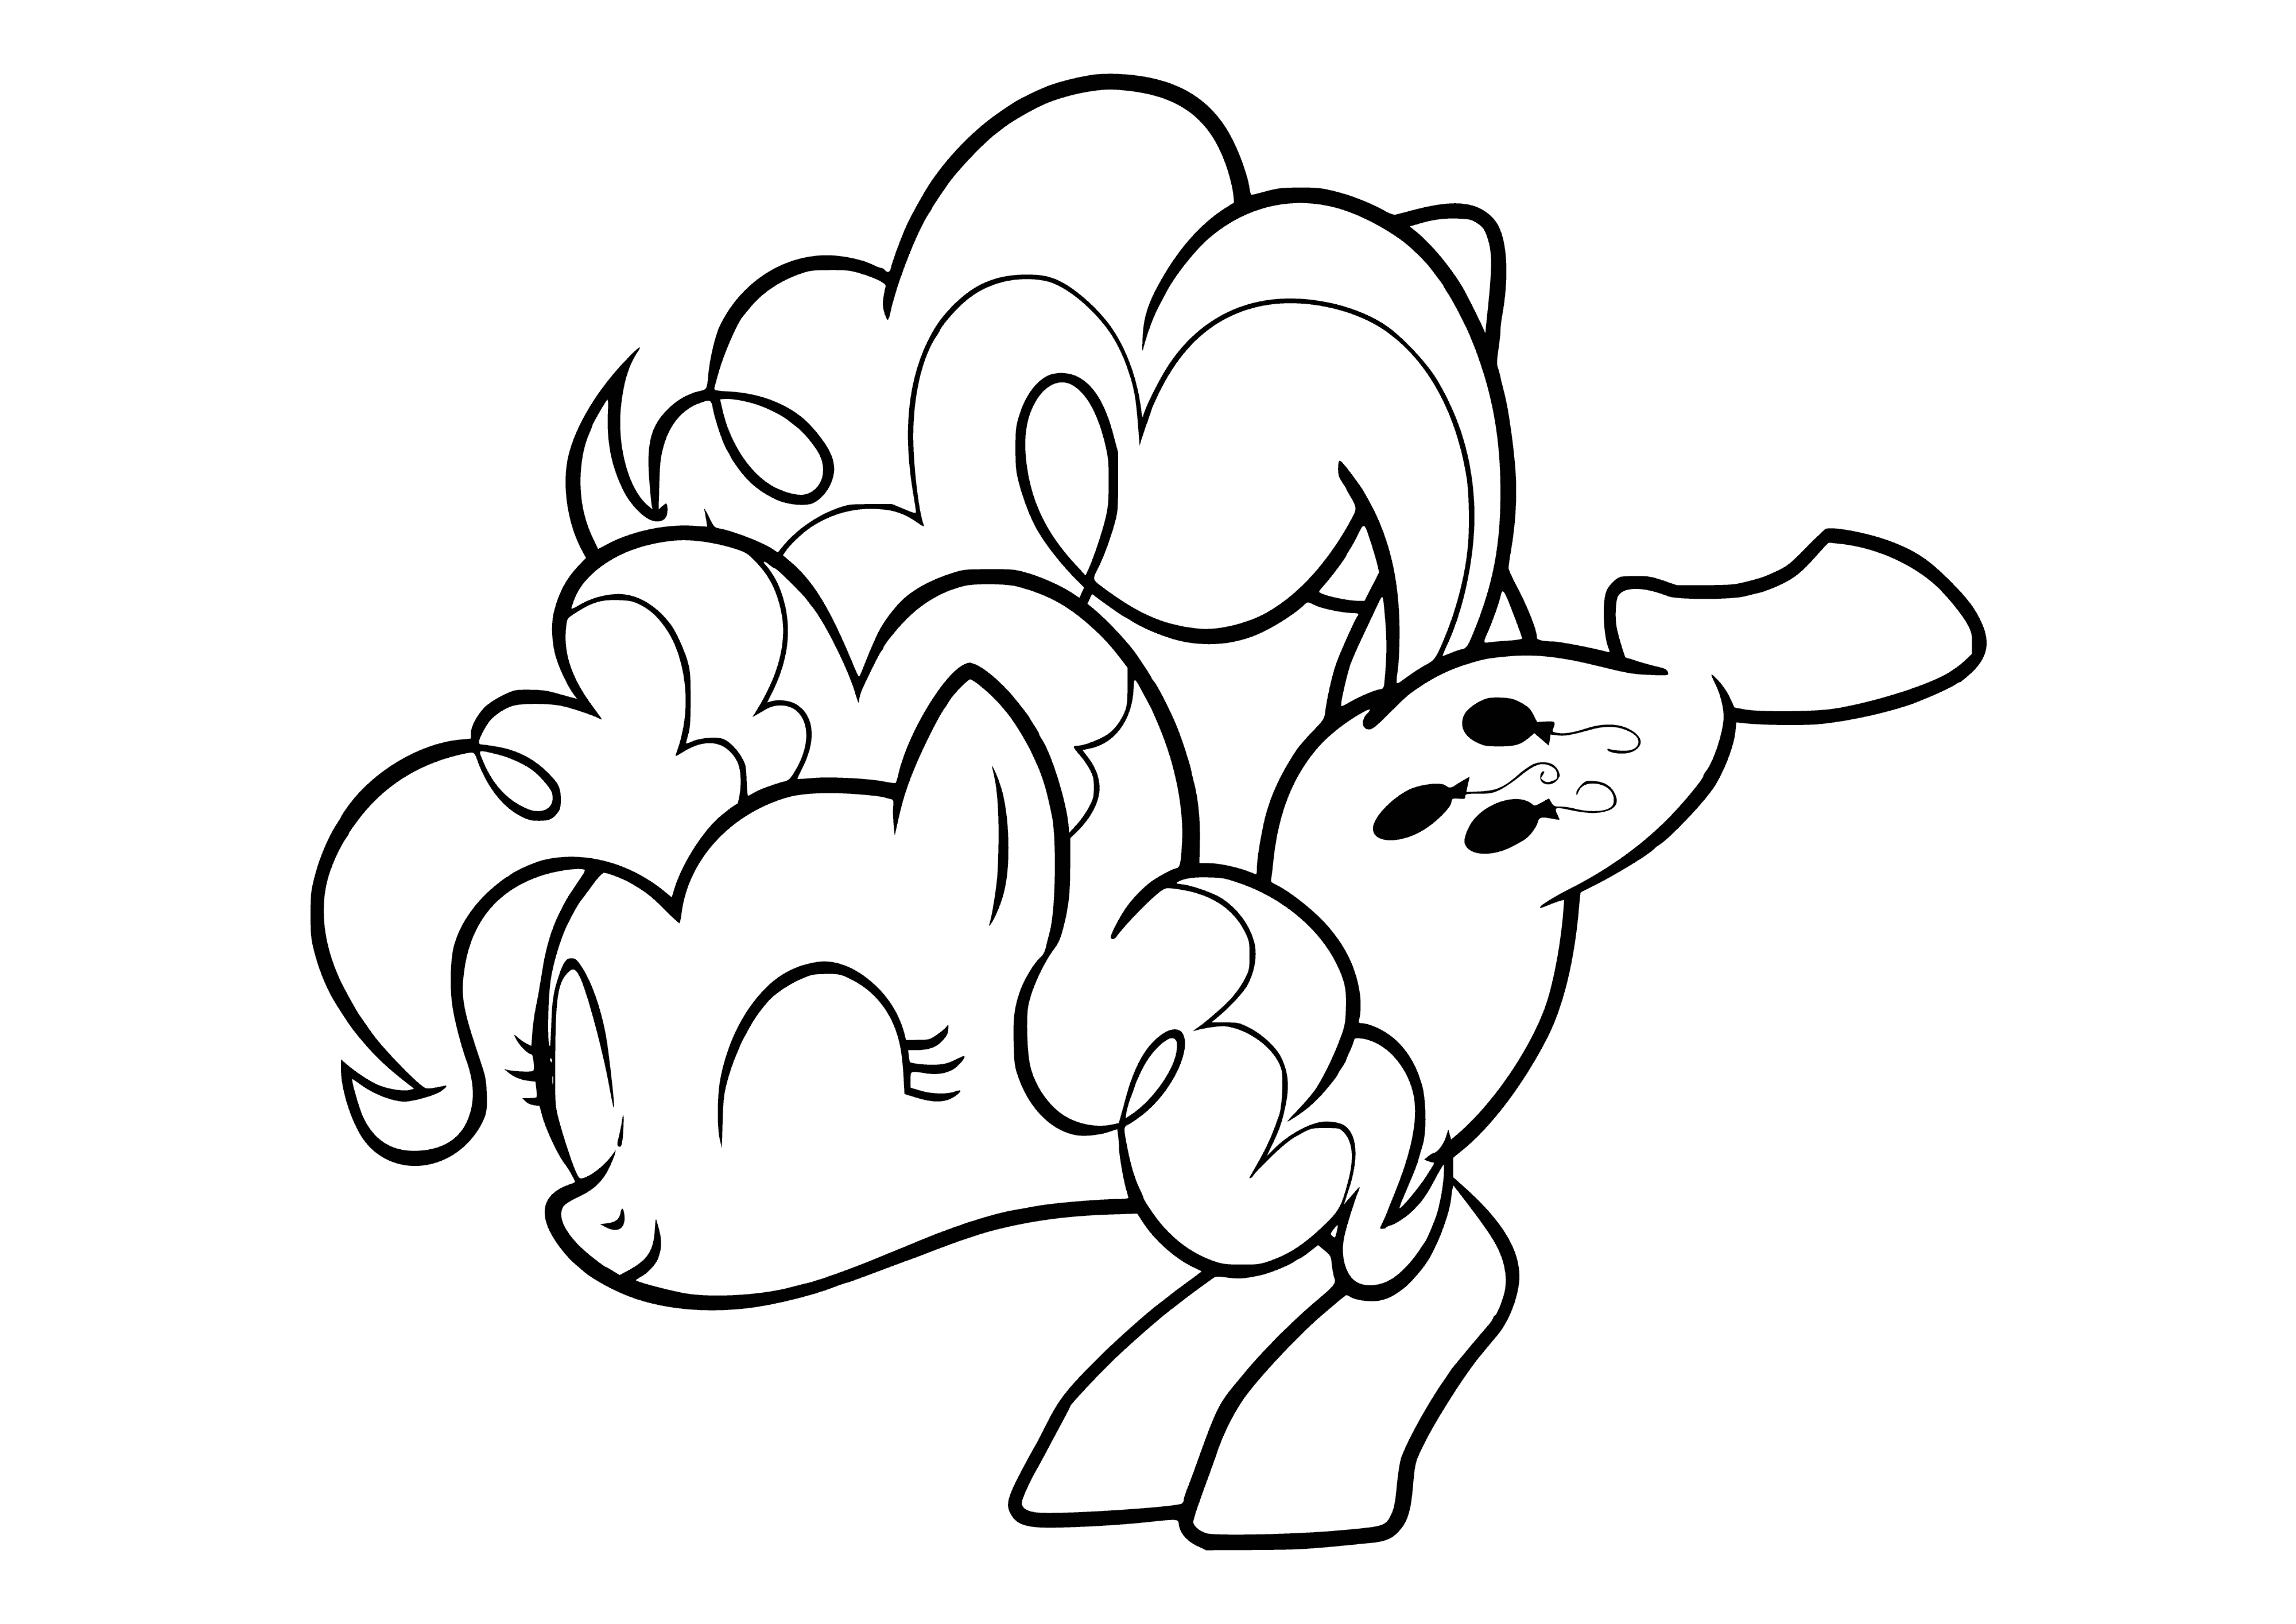 The pink pony Pinkie Pie is always cheerful and has a long mane and tail.